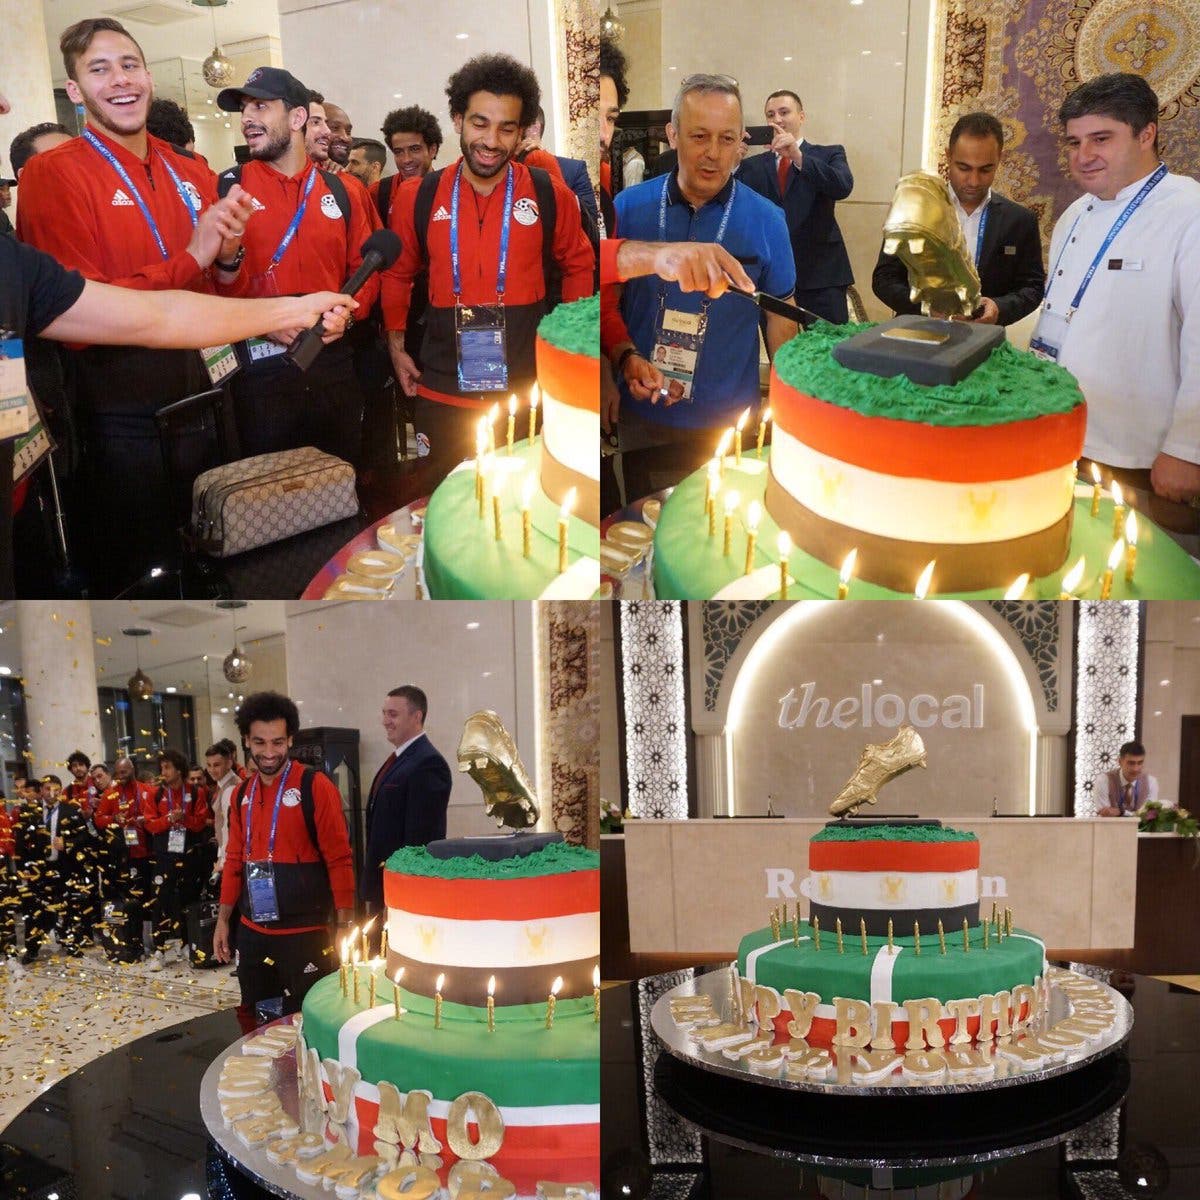 Salah smiled and hugged his team mates as they sang 'Happy Birthday' in English and Arabic before blowing out the candles. (Supplied)